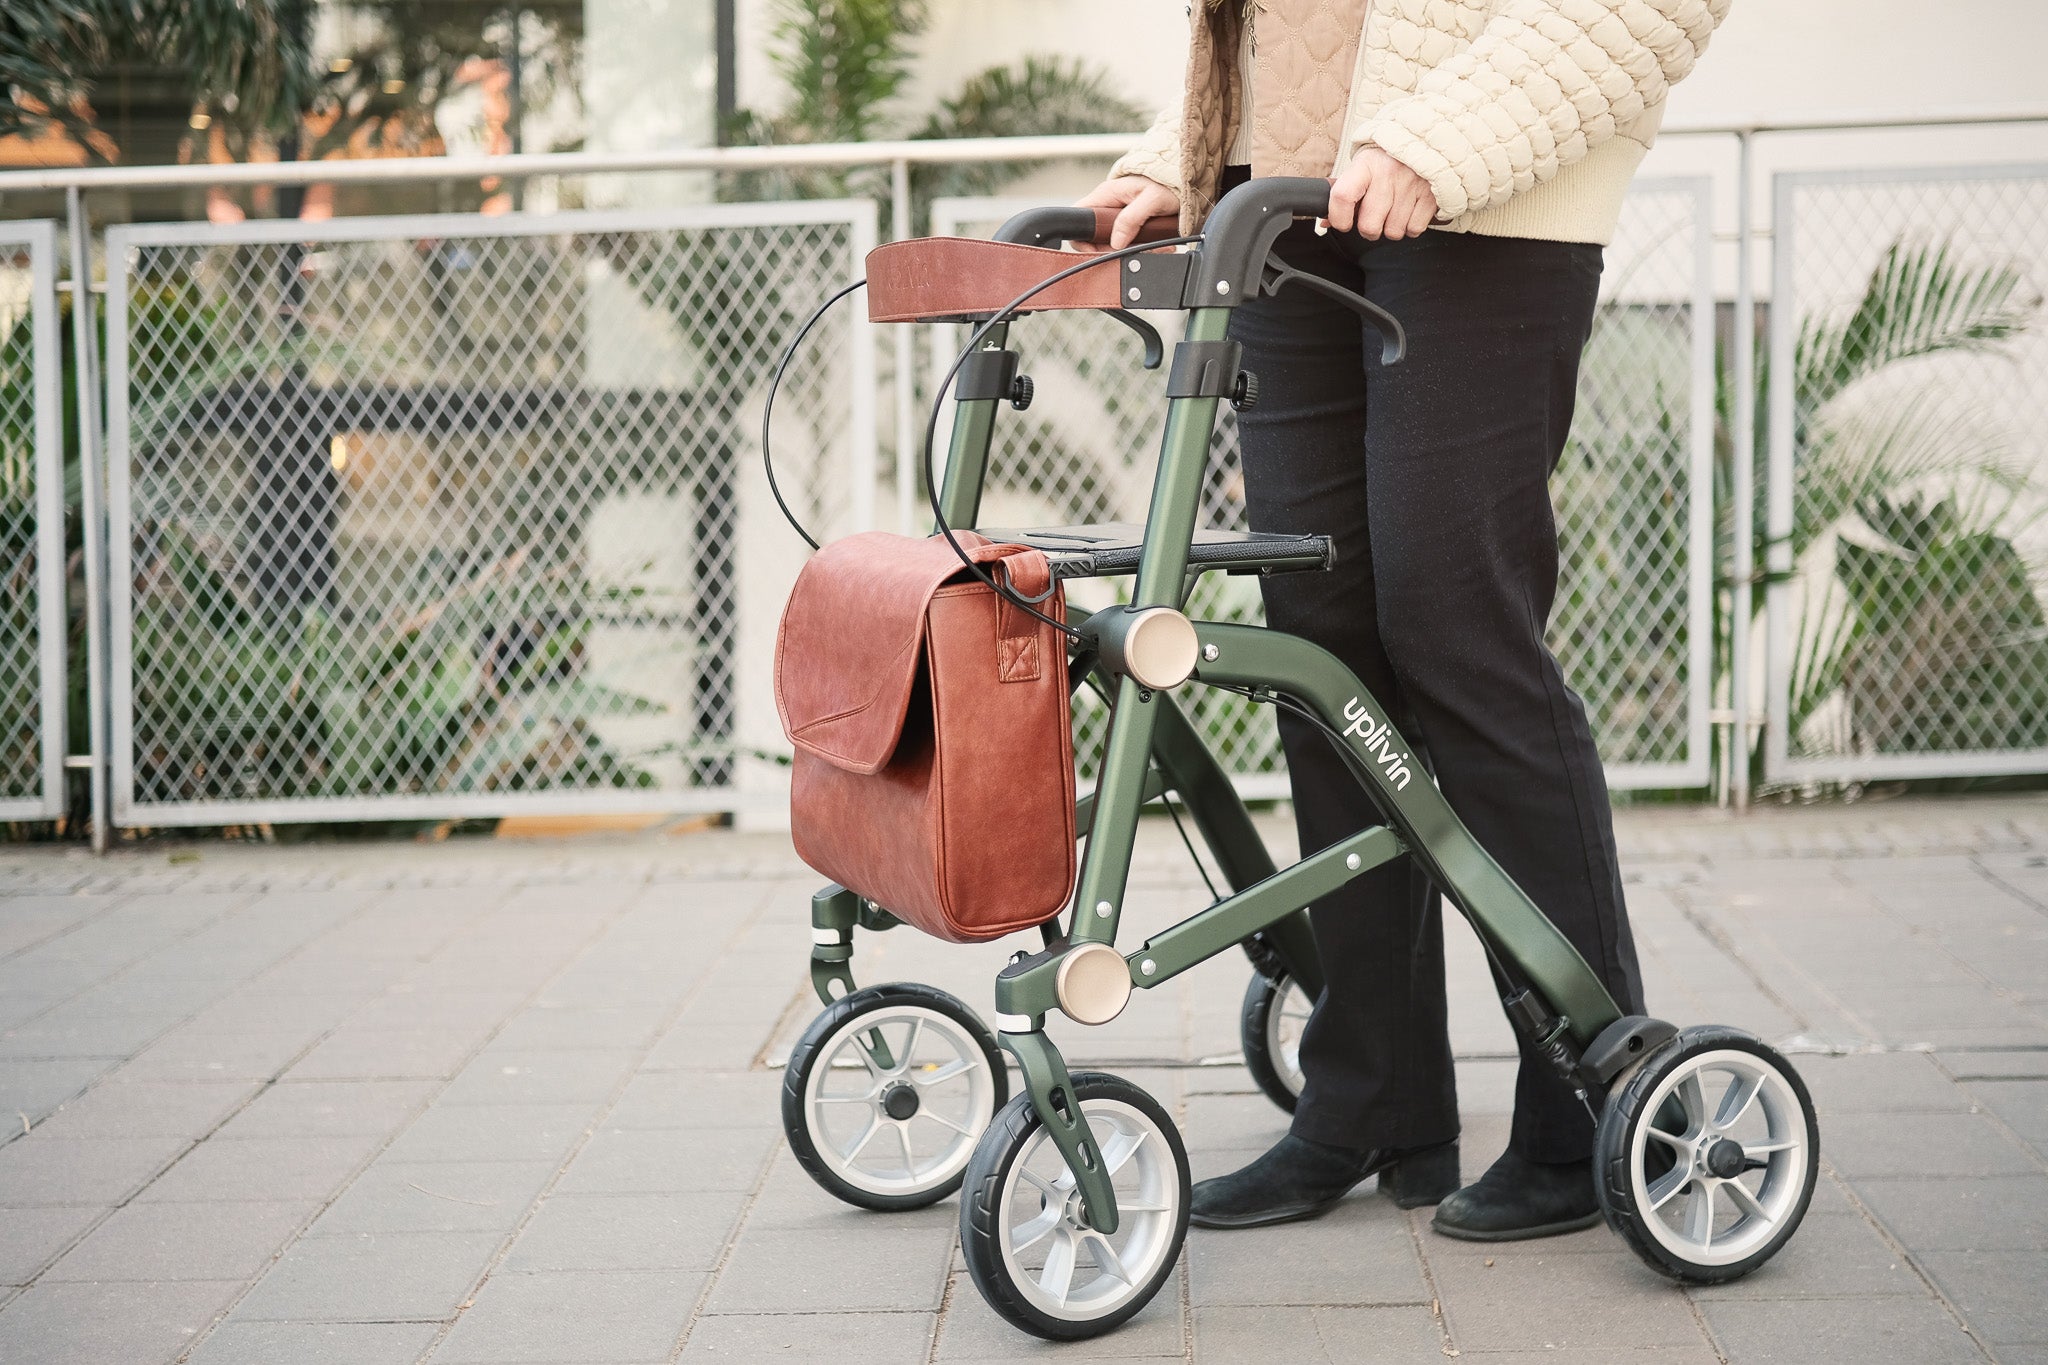 Close up of someone using the green 'Uplivin Trive' rollator on a brick footpath.